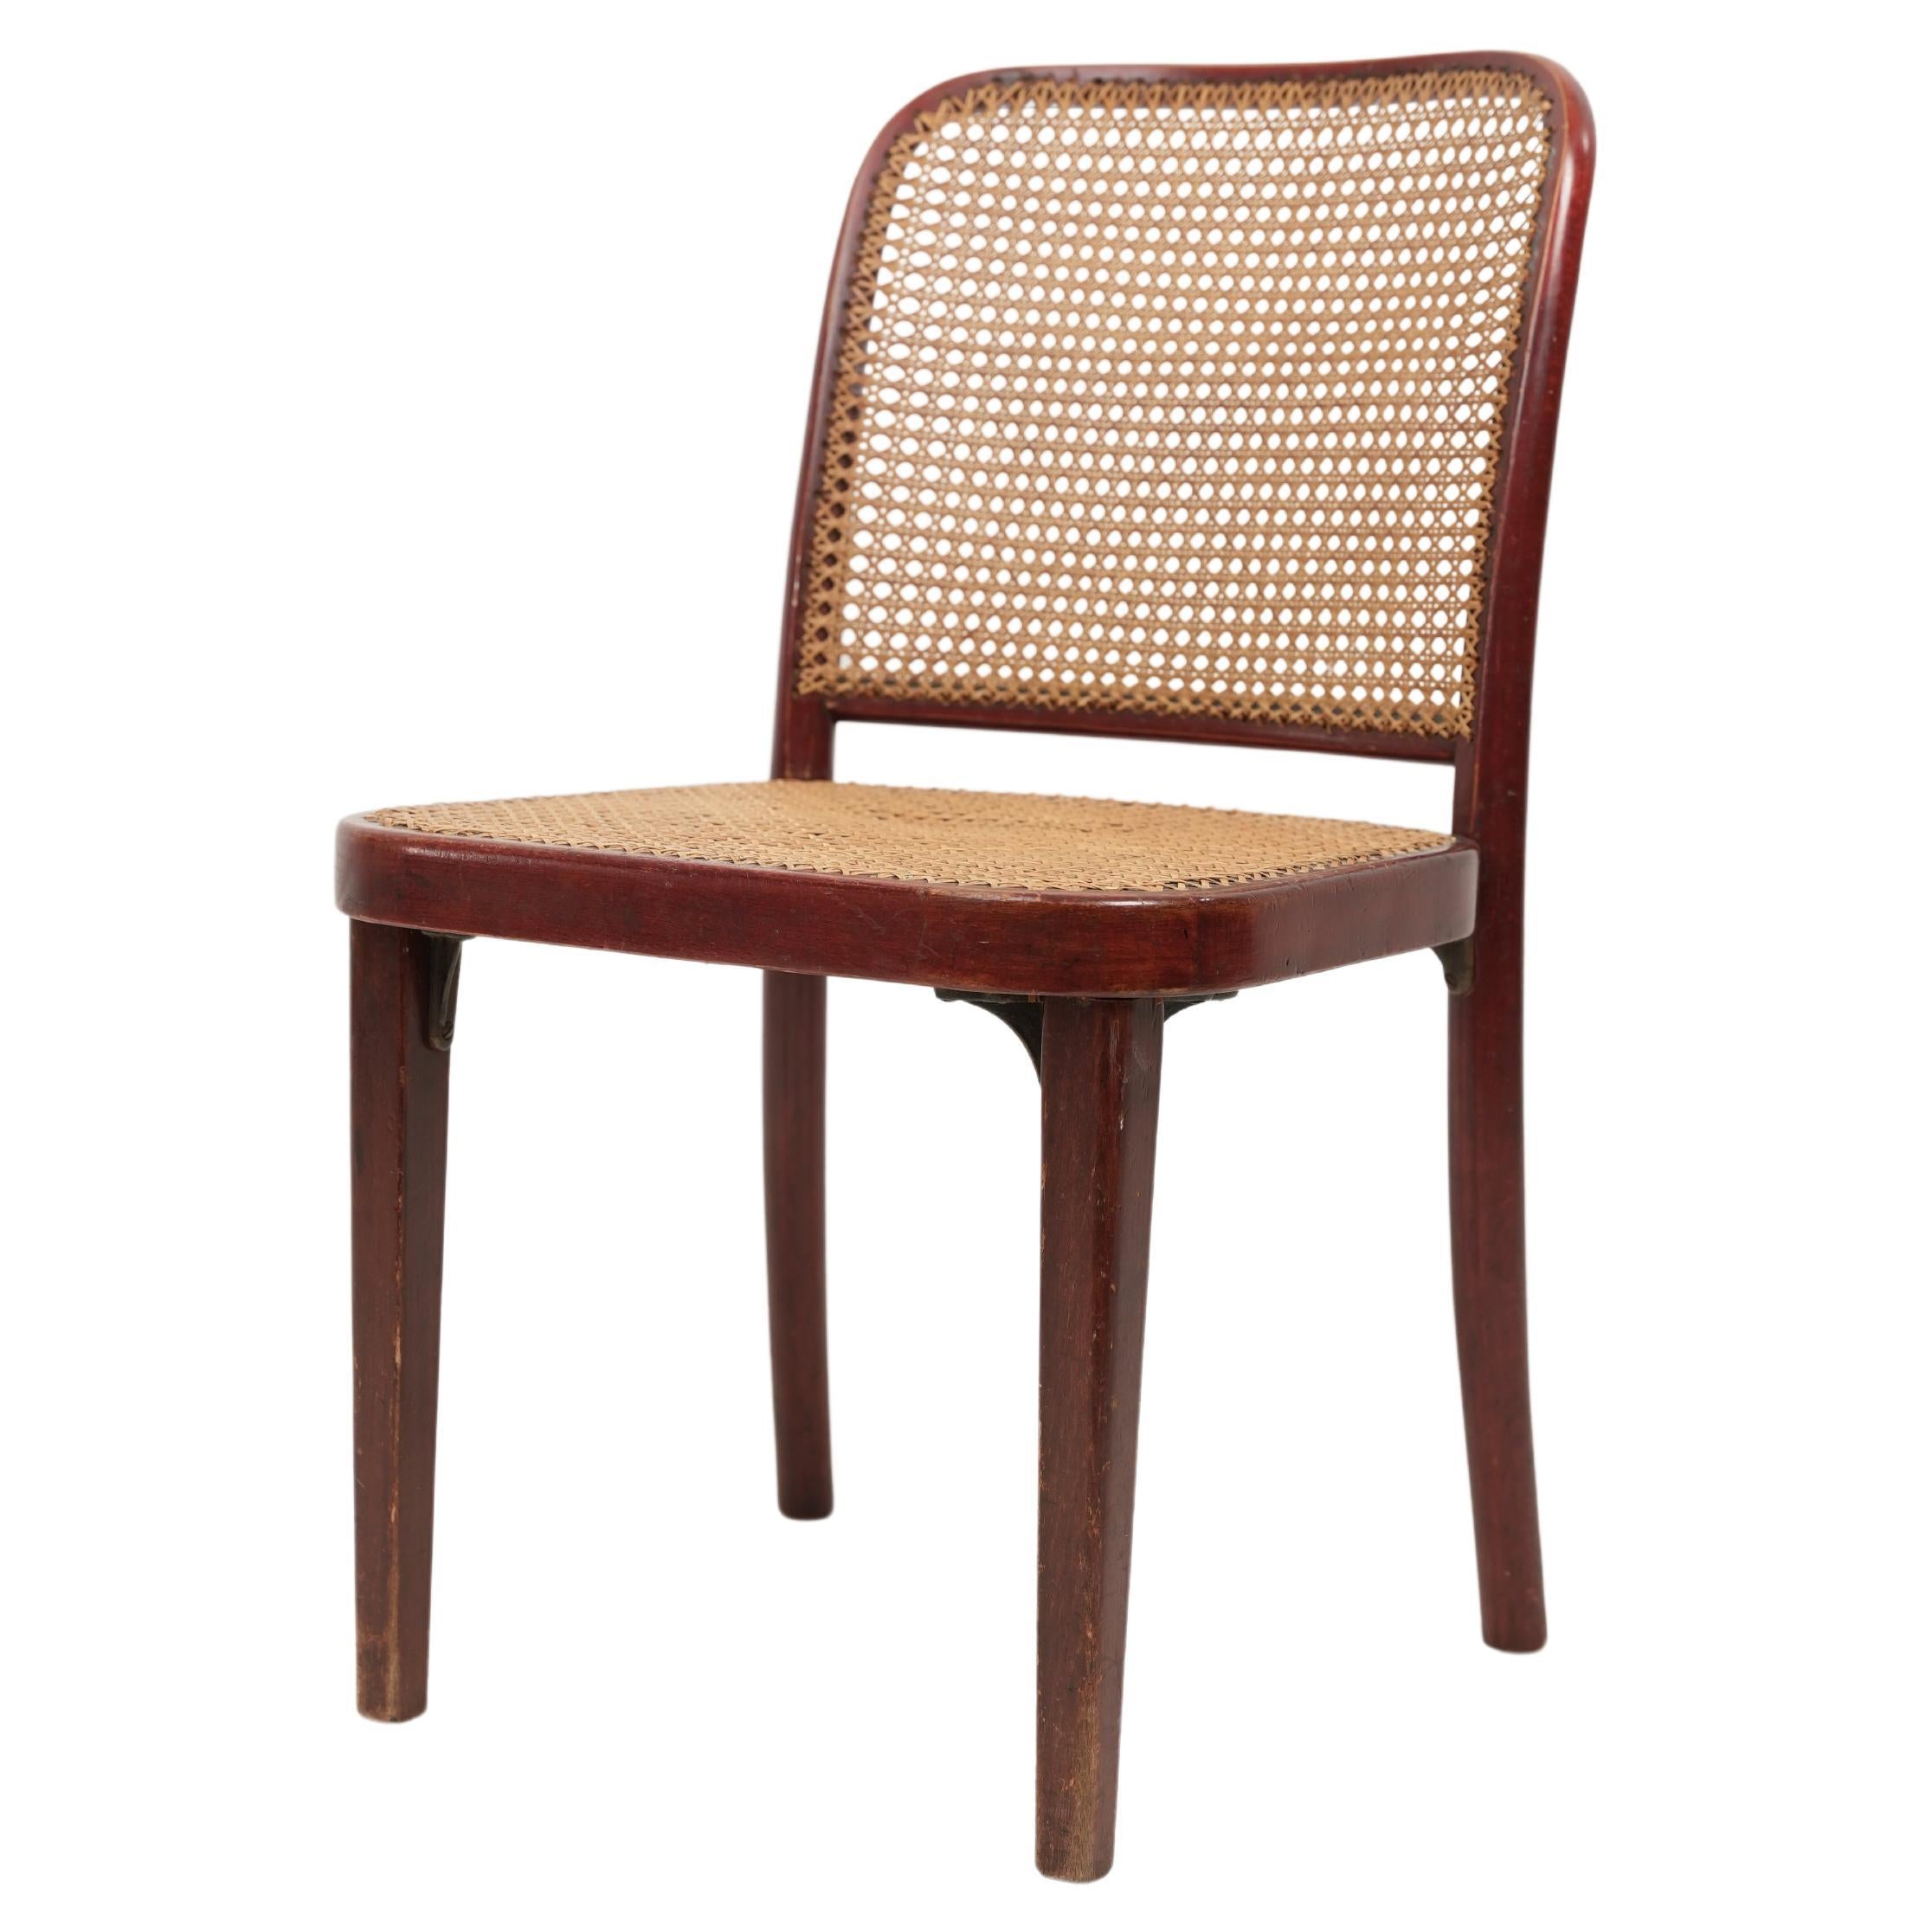 A 811 Chair By Josef Hoffmann or Josef Frank for Thonet 1920s For Sale